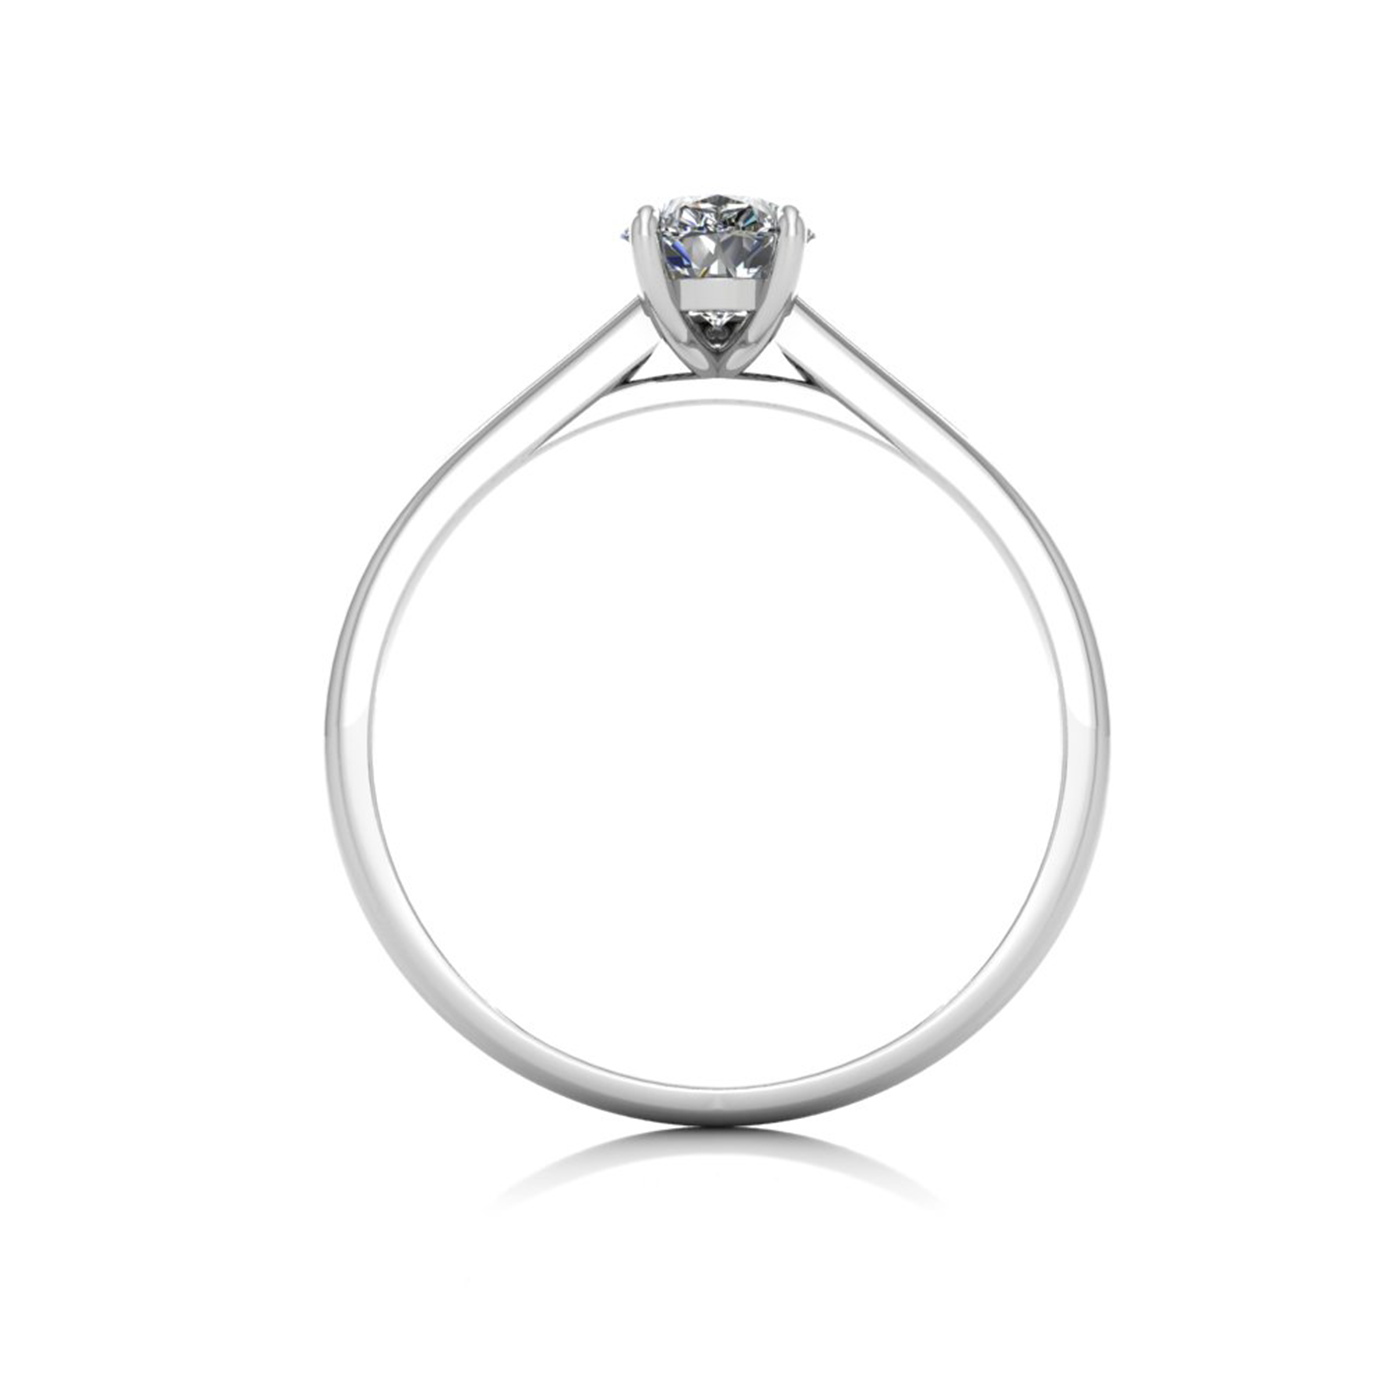 18k white gold  0,80 ct 3 prongs solitaire pear cut diamond engagement ring with whisper thin band